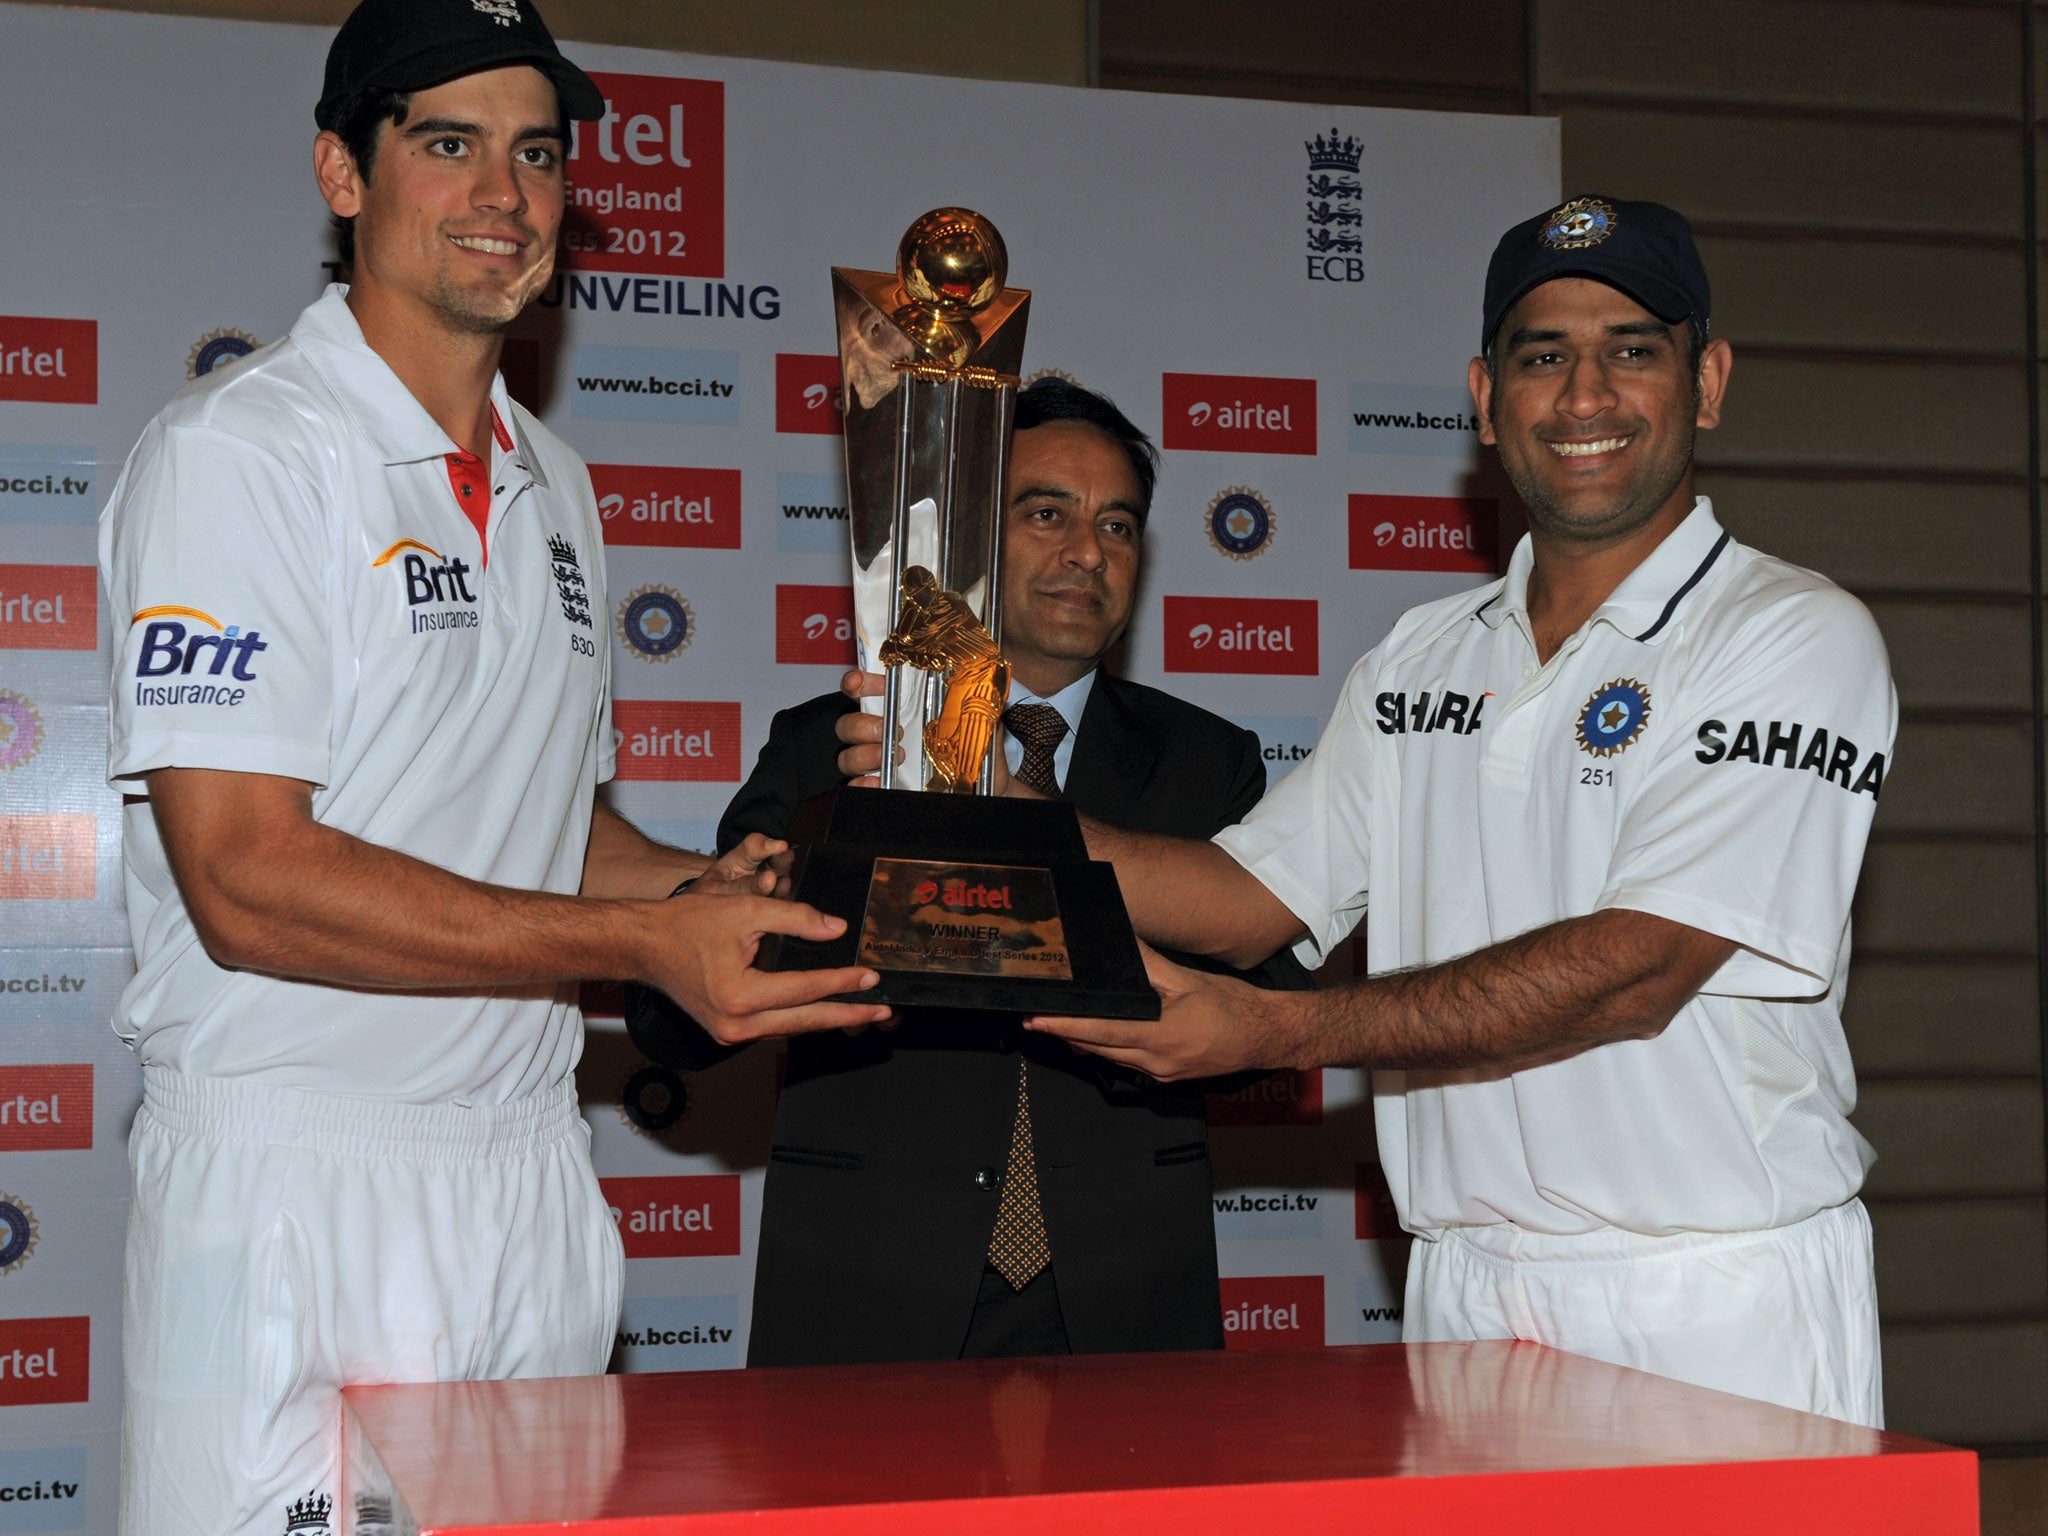 England cricket team captain Alastair Cook (left) and his Indian team counterpart Mahendra Singh Dhoni (right) pose with the championship trophy with Bharti Airtel Gujarat CEO Anant Arora (centre) in Ahmedabad in November 2012